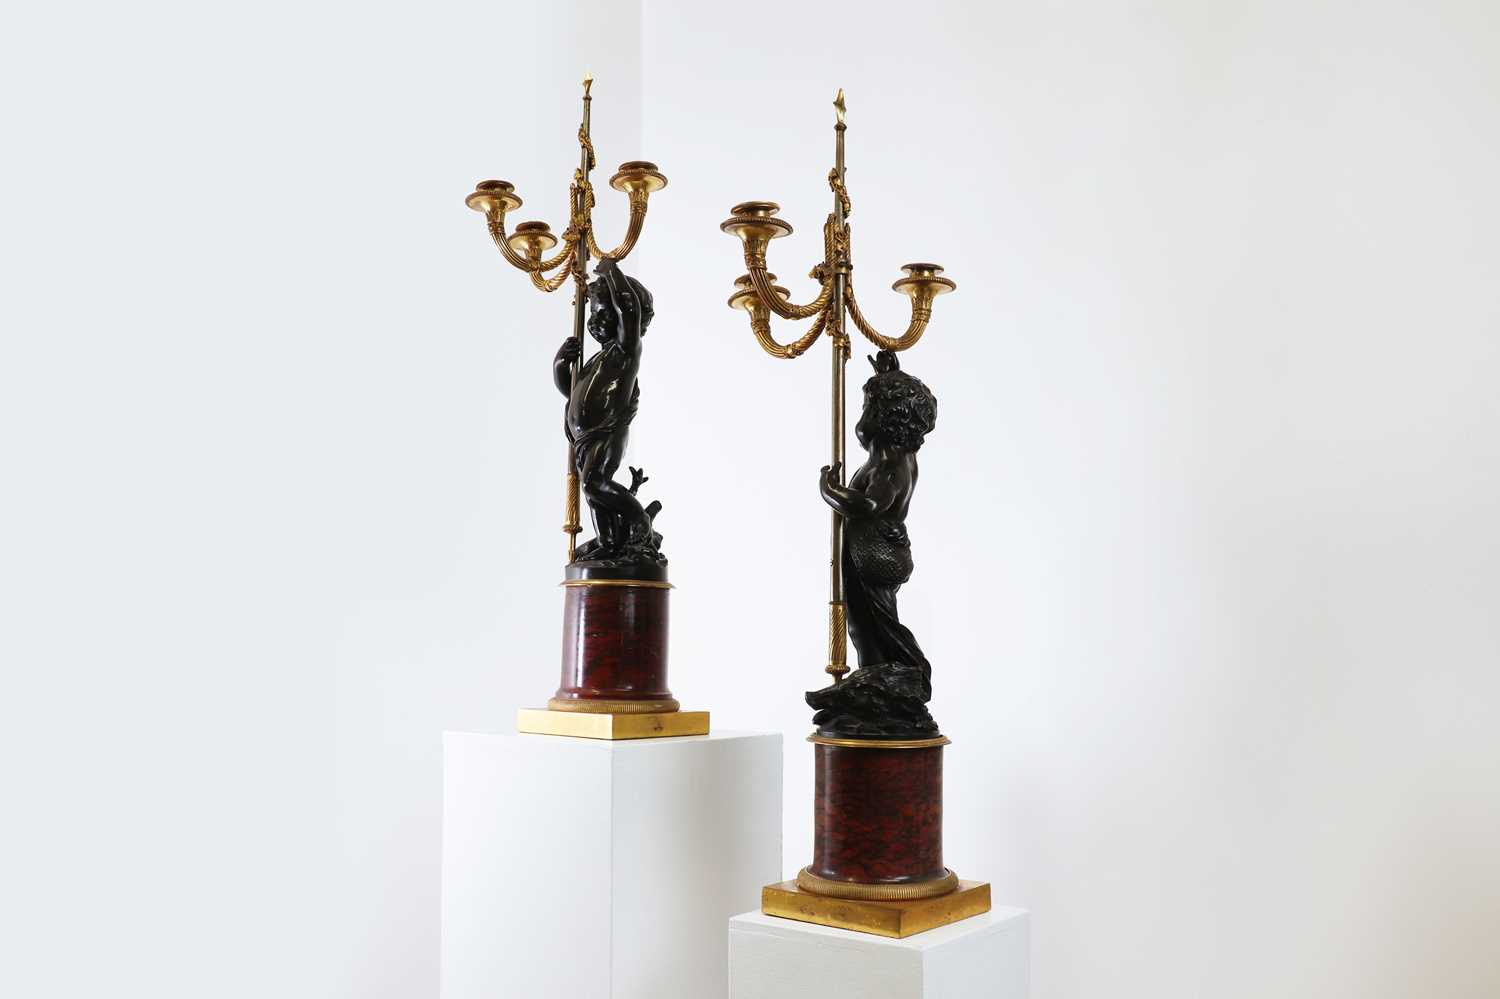 A pair of French Empire bronze and marble candelabra attributed to François Rémond (c.1747-1812), - Image 5 of 23